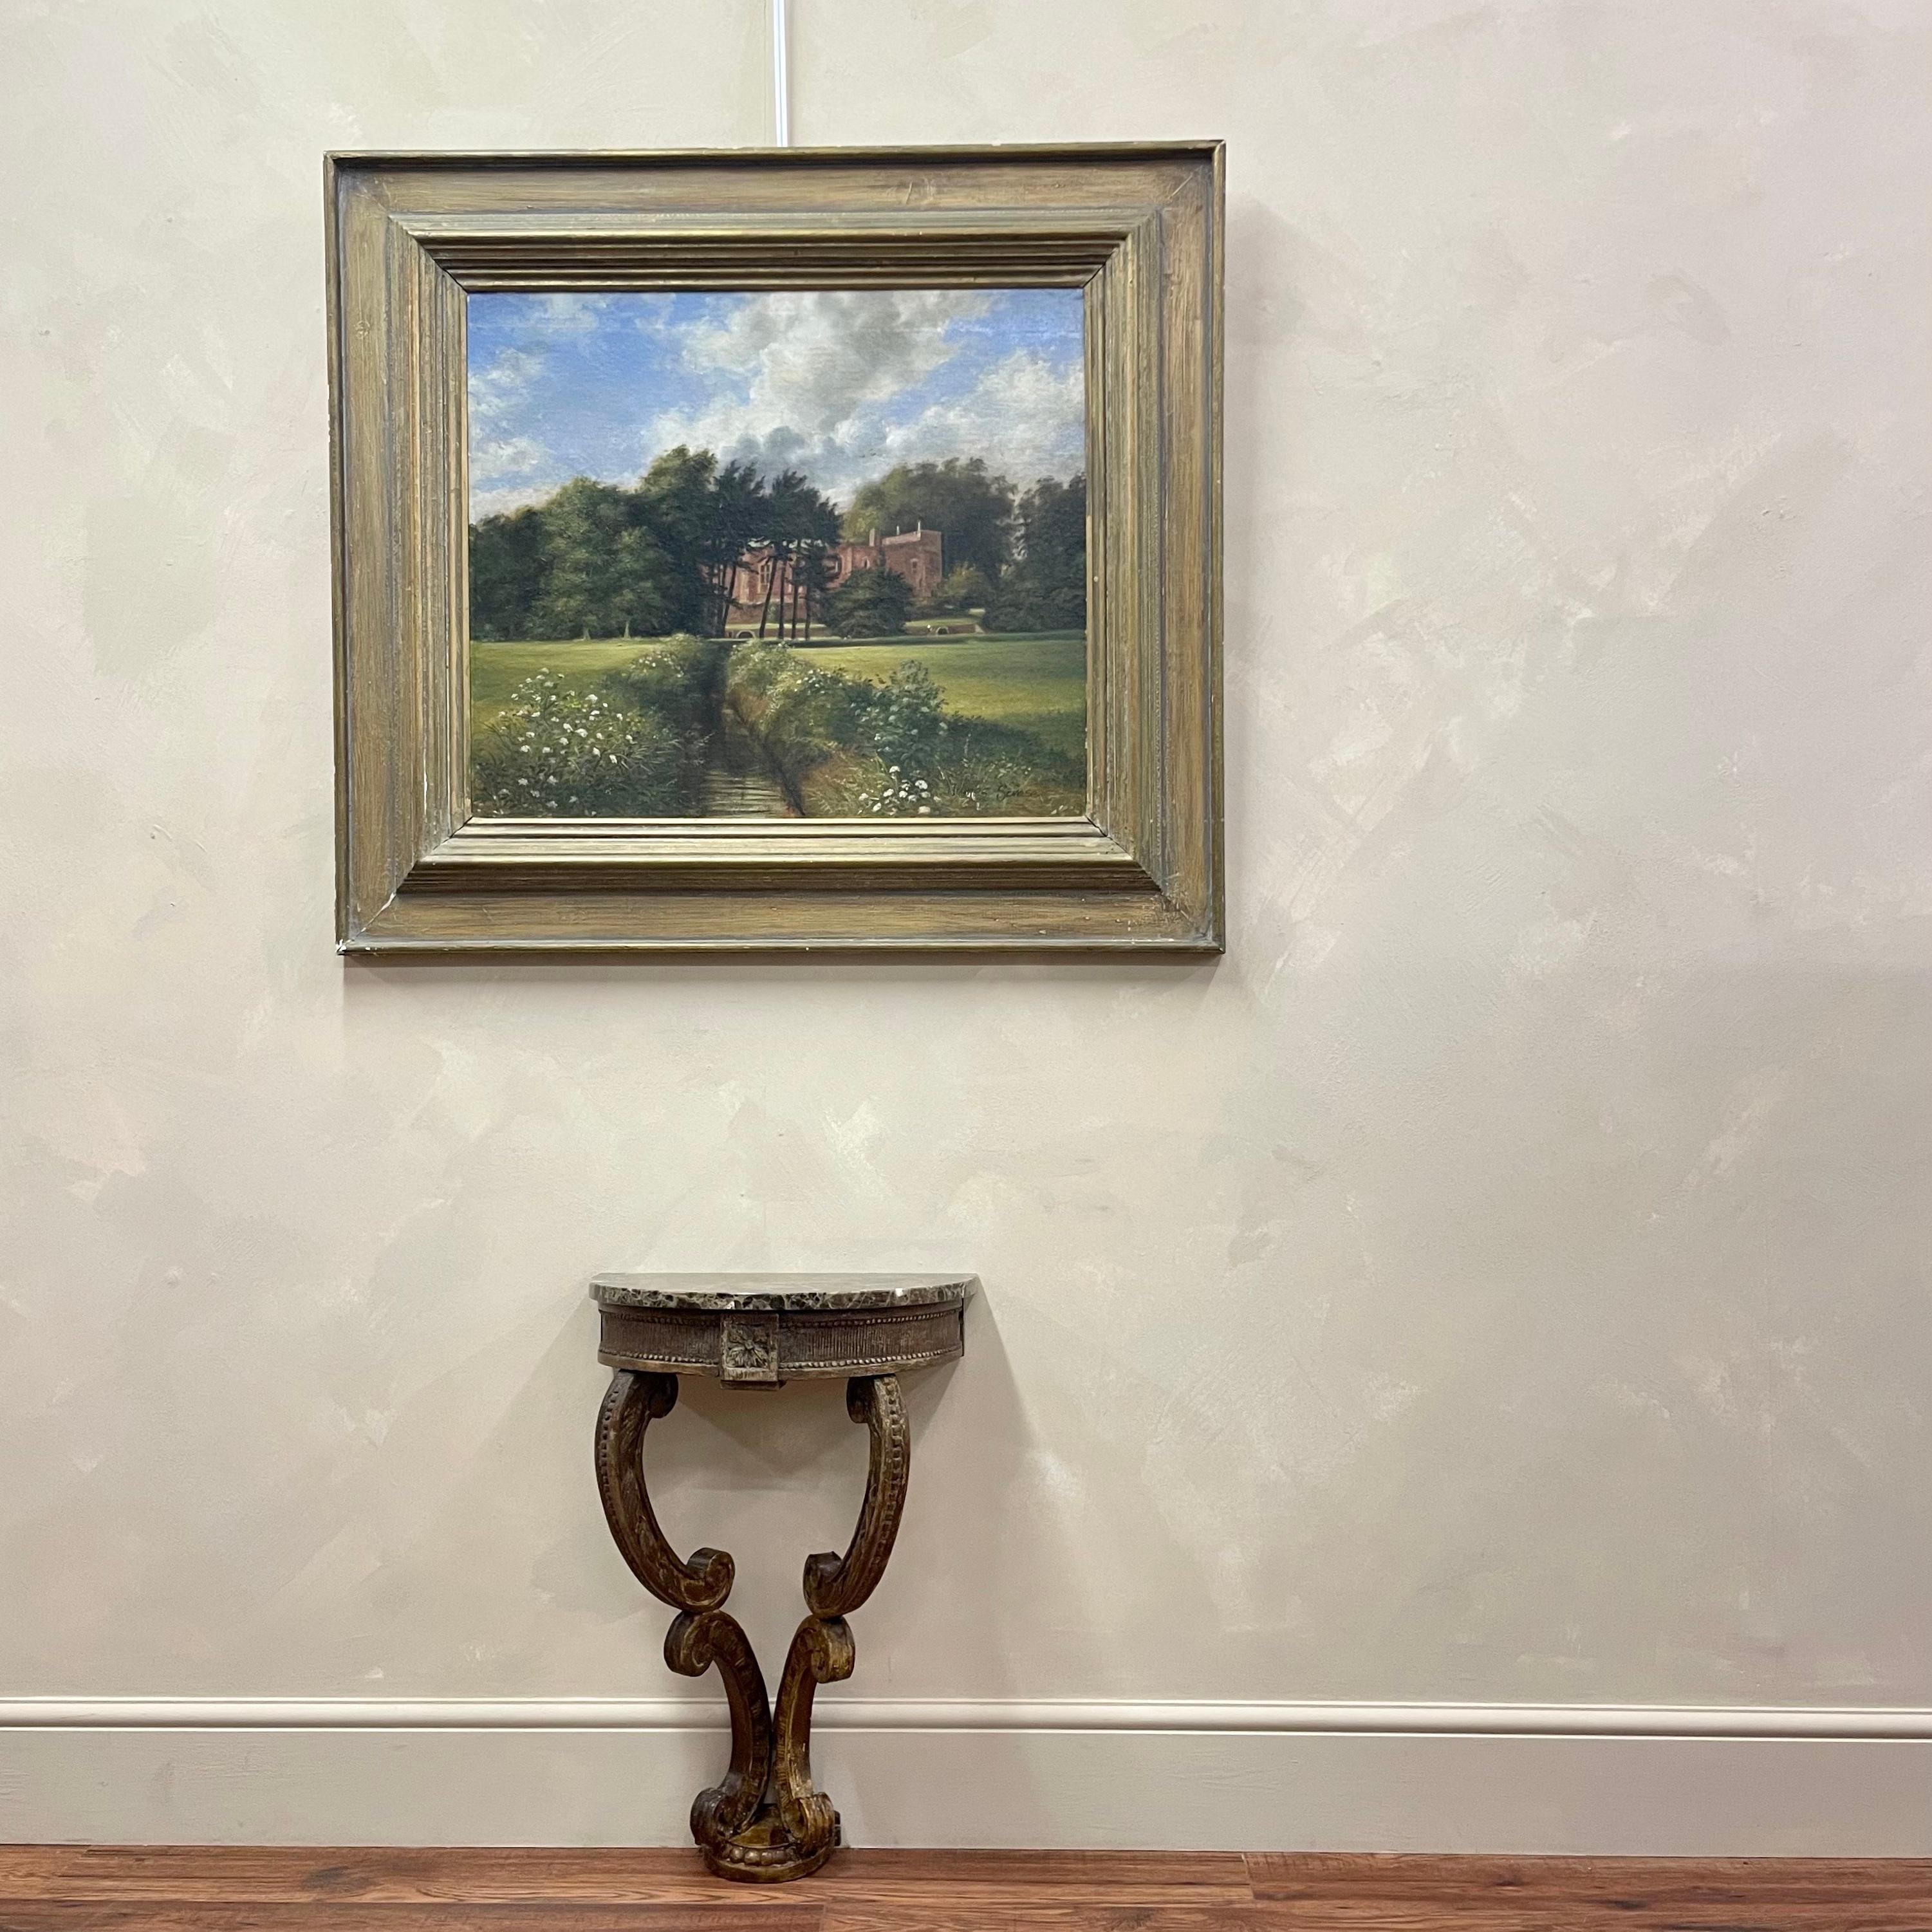 This was purchased directly from the family James Scrase and never been available to purchase before 
Large scale, signed James Scrase (1938-2018) oil landscape of Berkeley Castle, Gloucestershire. 
The castle, which dates back to the 11th